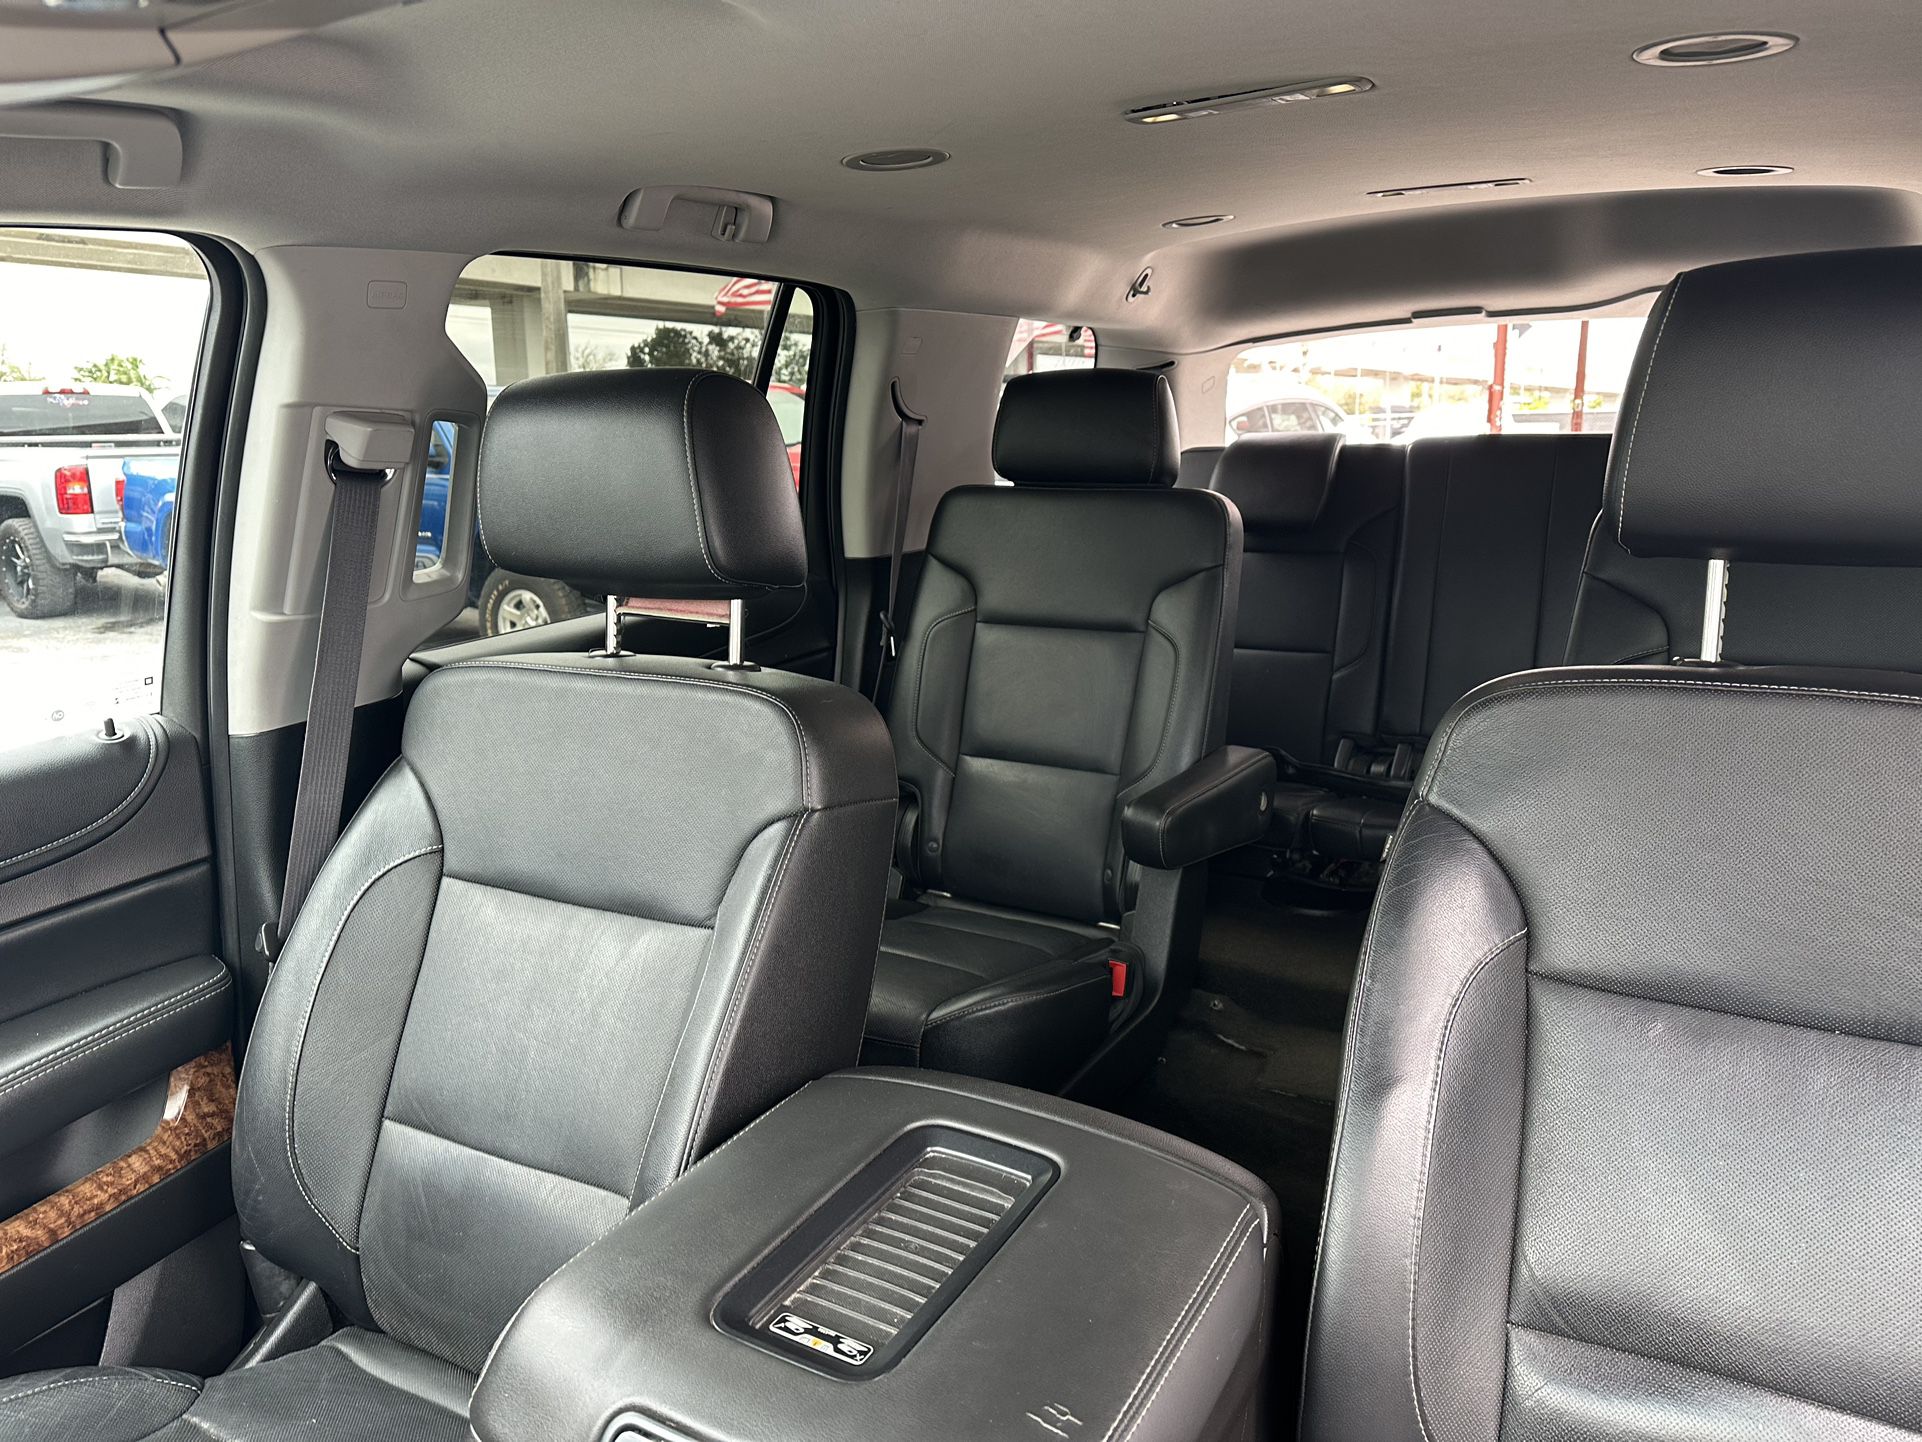 used 2017 Chevy Tahoe - interior view 2